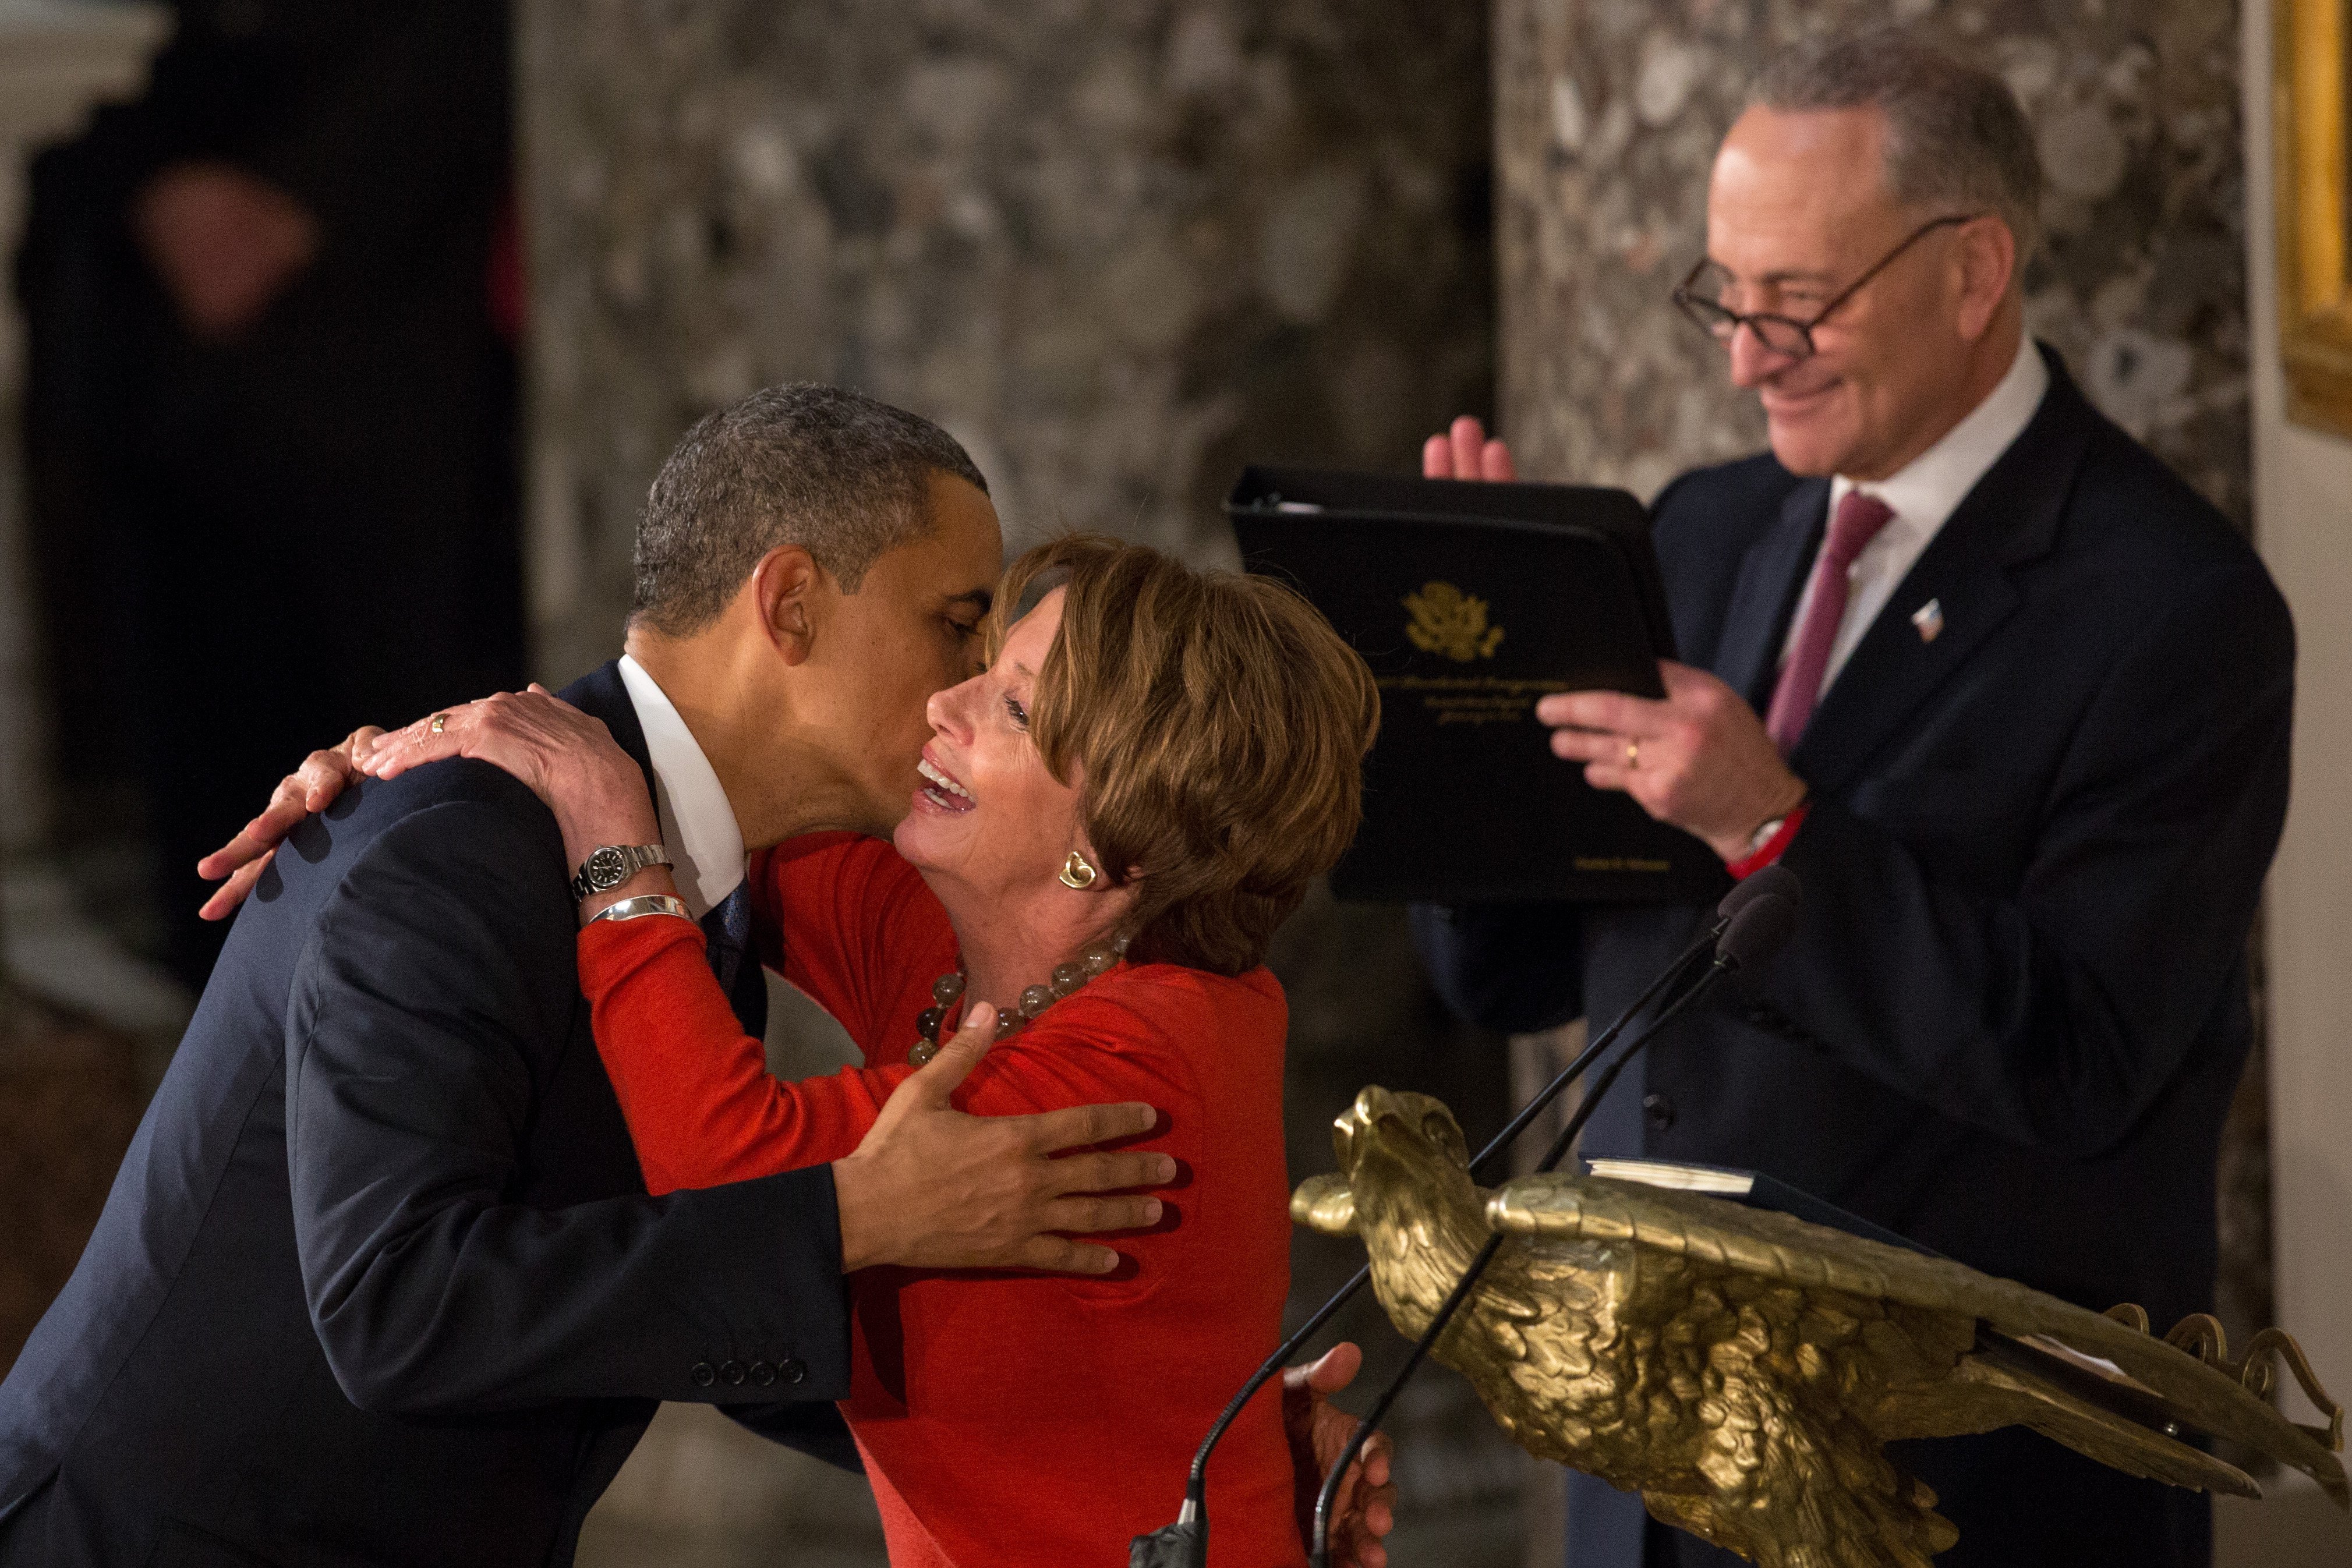 Barack Obama and Nancy Pelosi greeting each other at the Inaugural Luncheon in Statuary Hall in 2013 | Photo: Getty Images